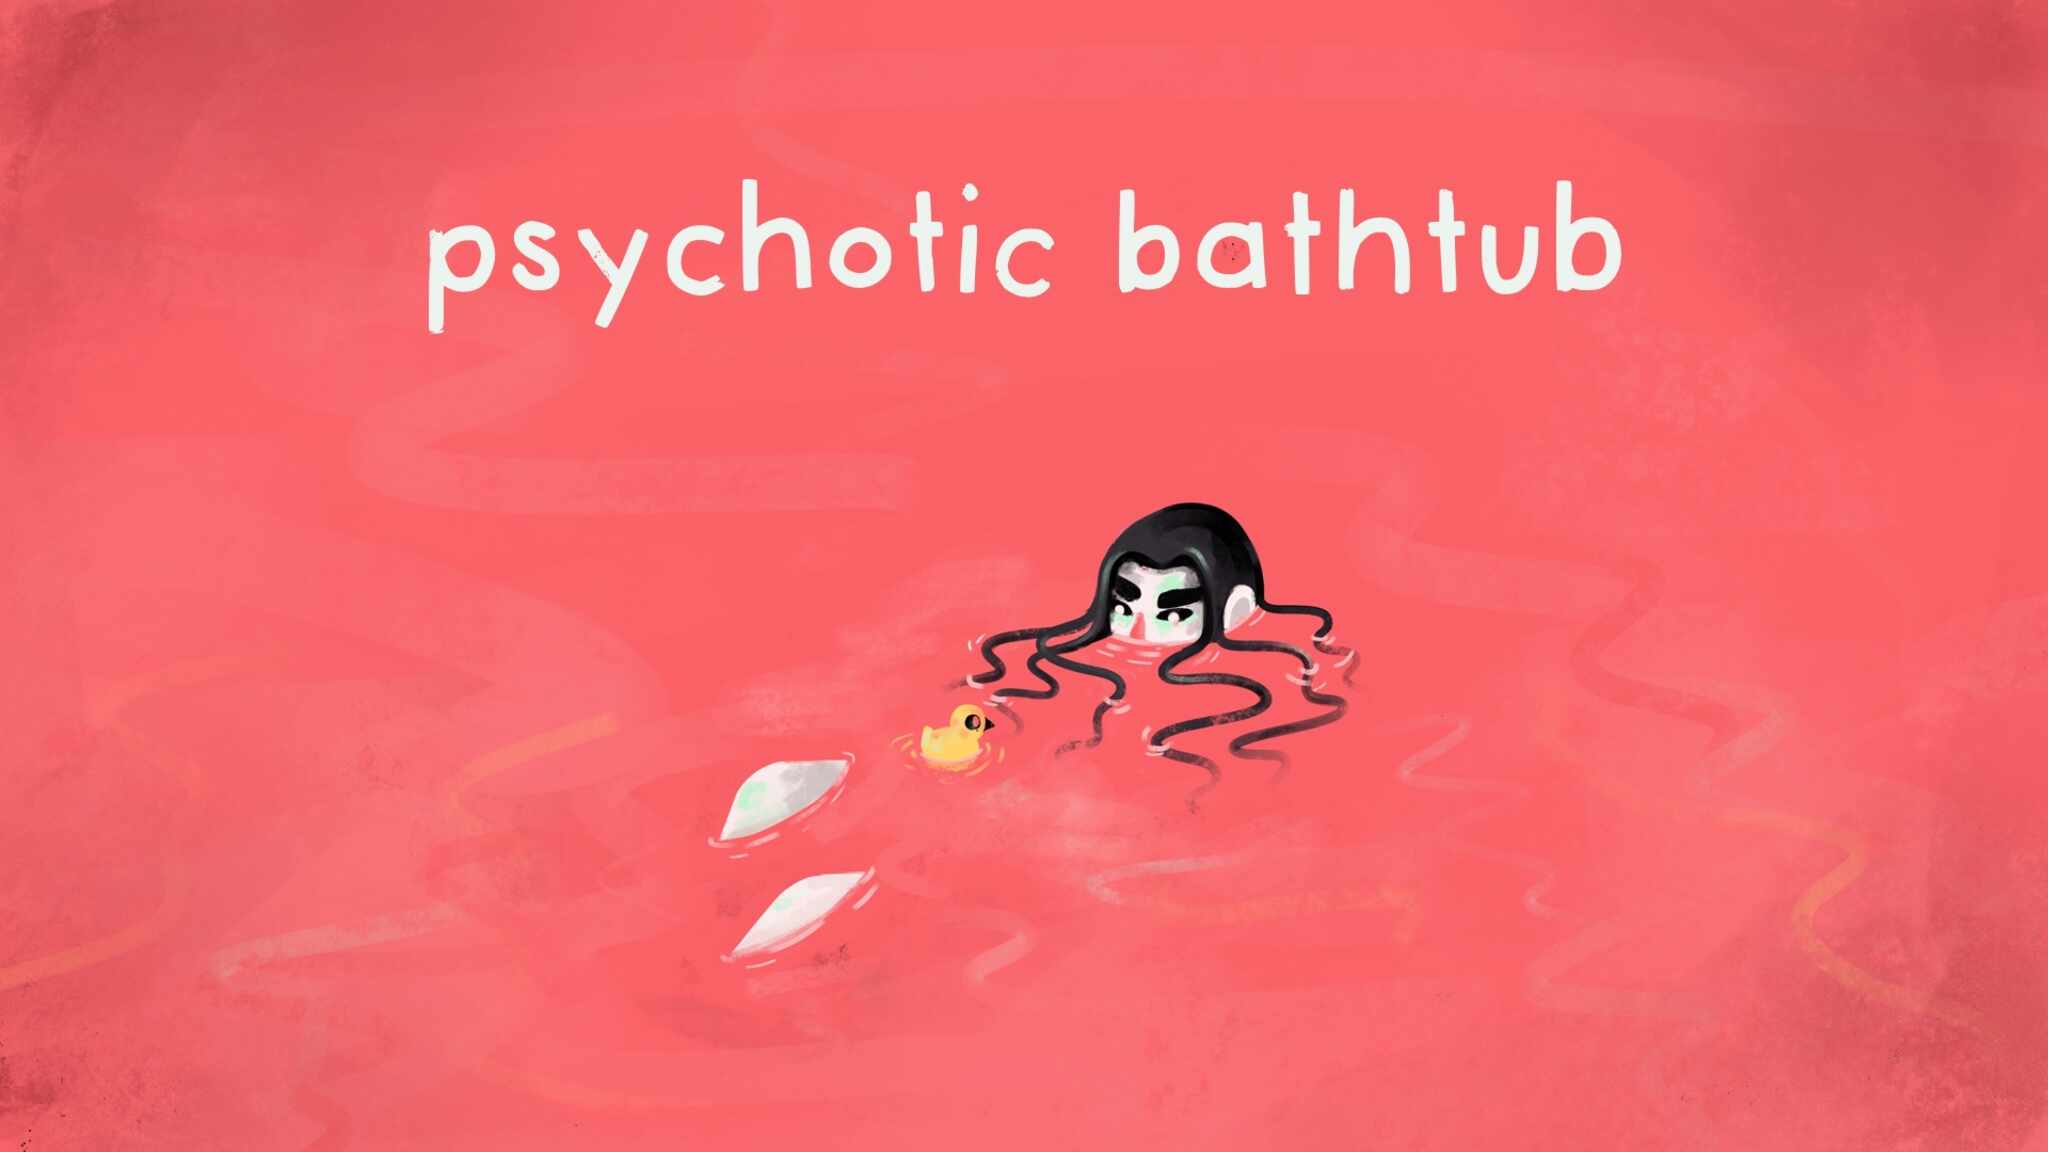 Psychotic Bathtub – The Story of an Escalating Mind. And Ducks.